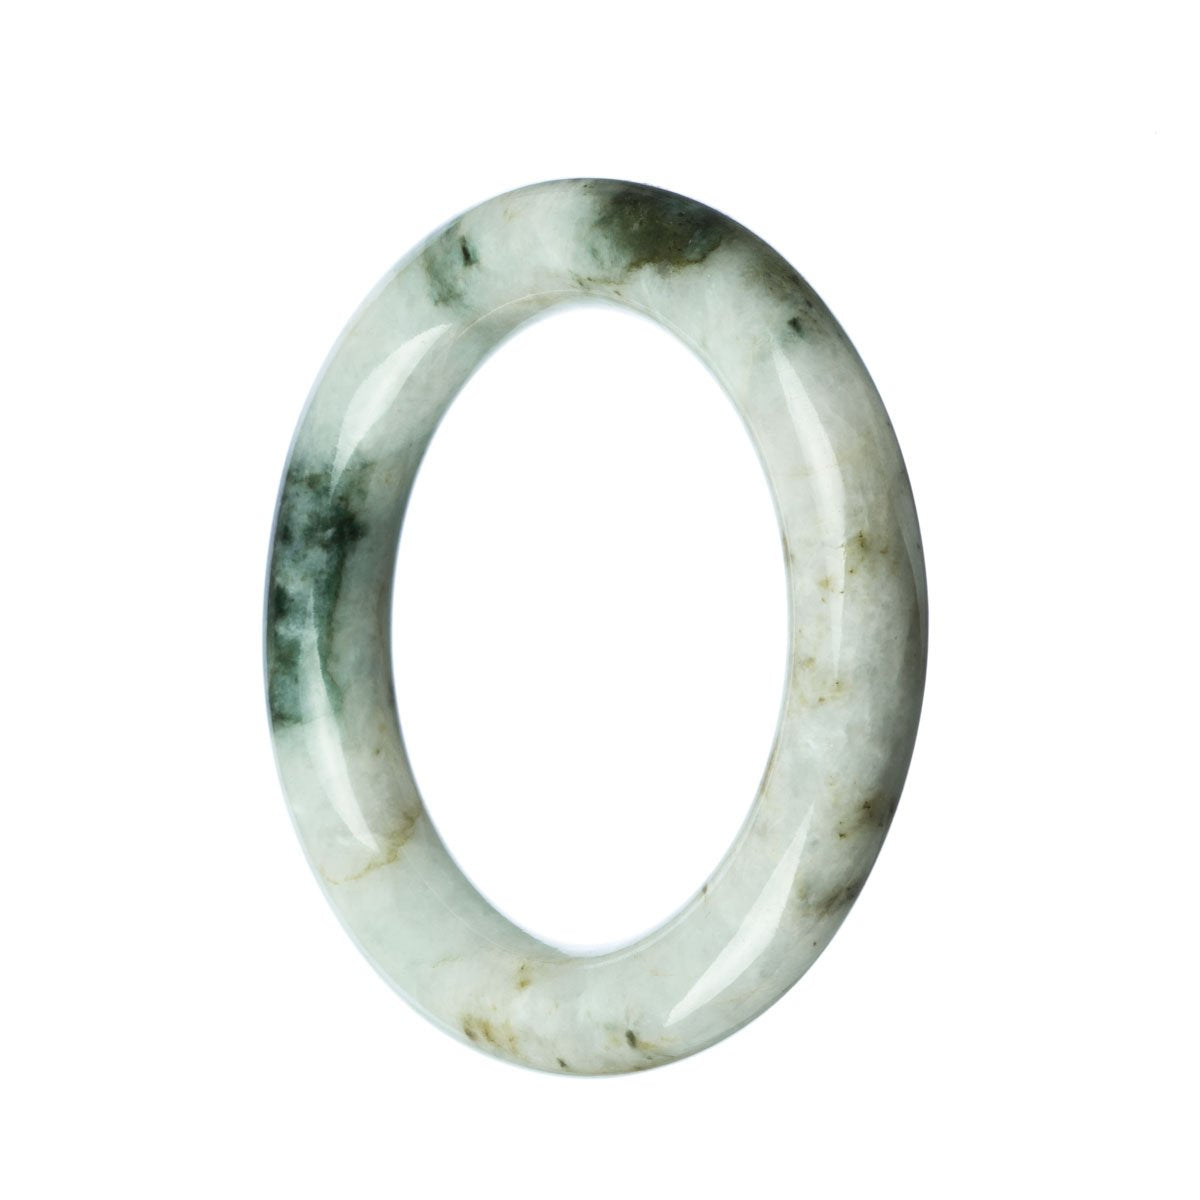 A round, white and green Burmese jade bangle, certified as Grade A quality, with a diameter of 57mm. Sold by MAYS.